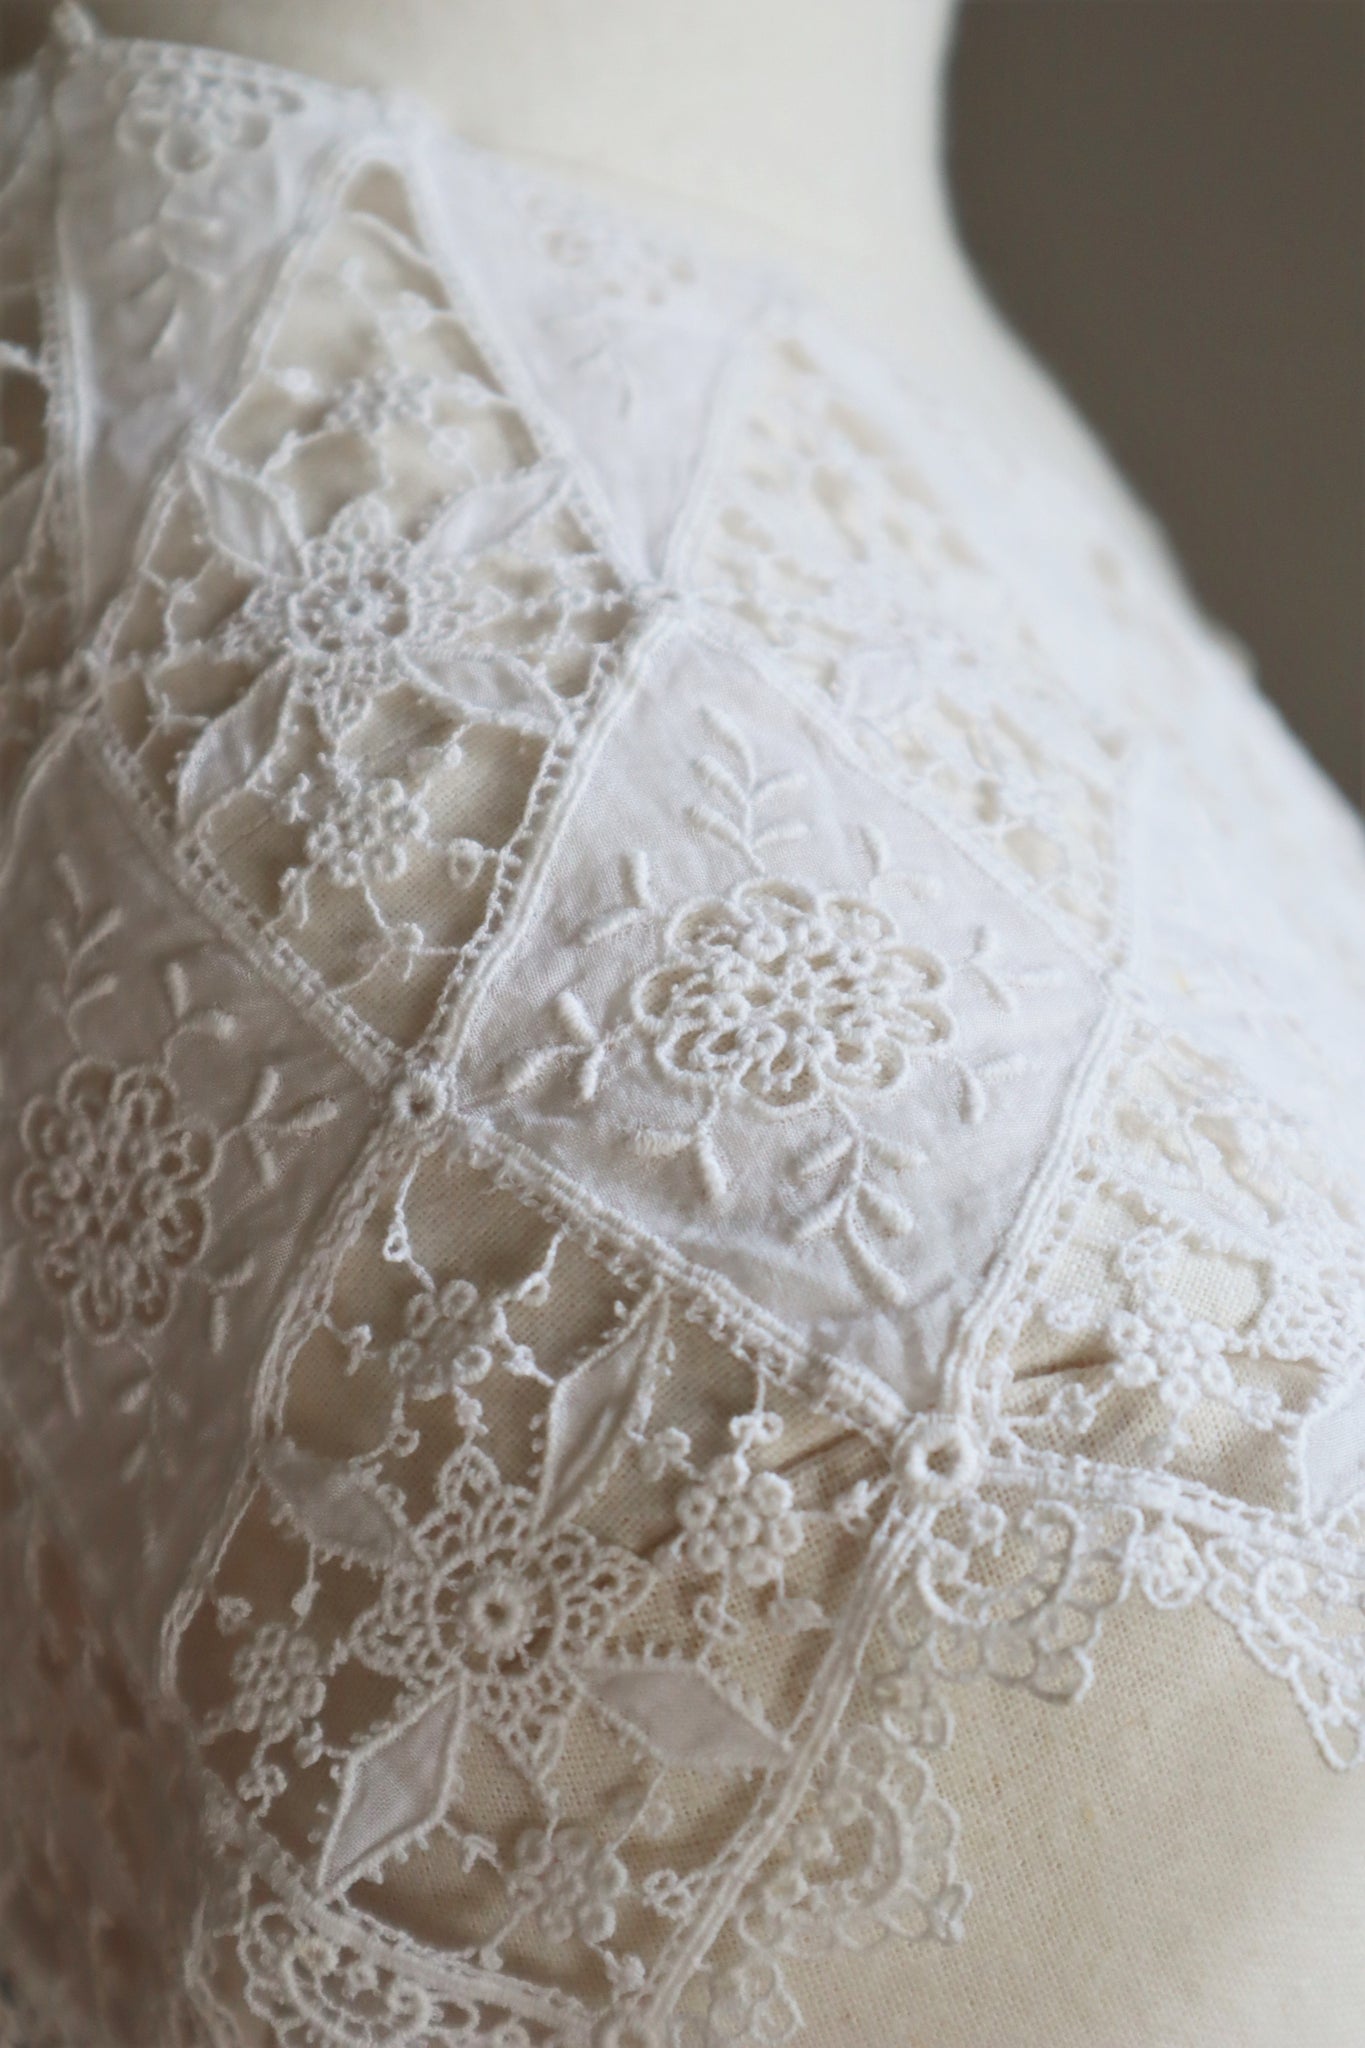 19th Embroidered Batiste And Needle Lace White Collar